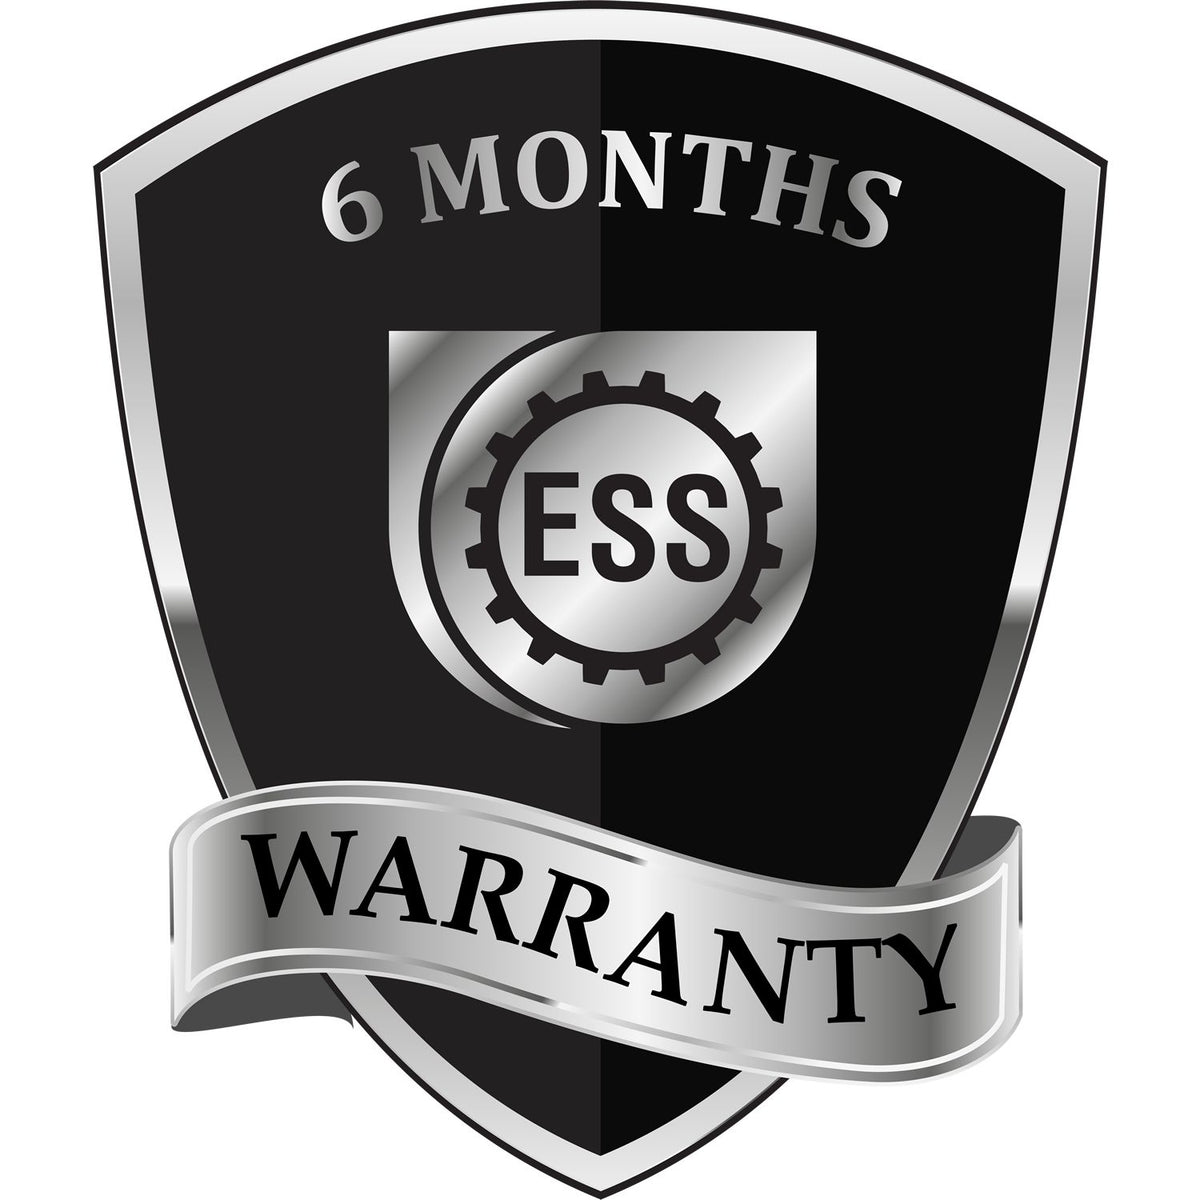 A badge or emblem showing a warranty icon for the Self-Inking Georgia PE Stamp